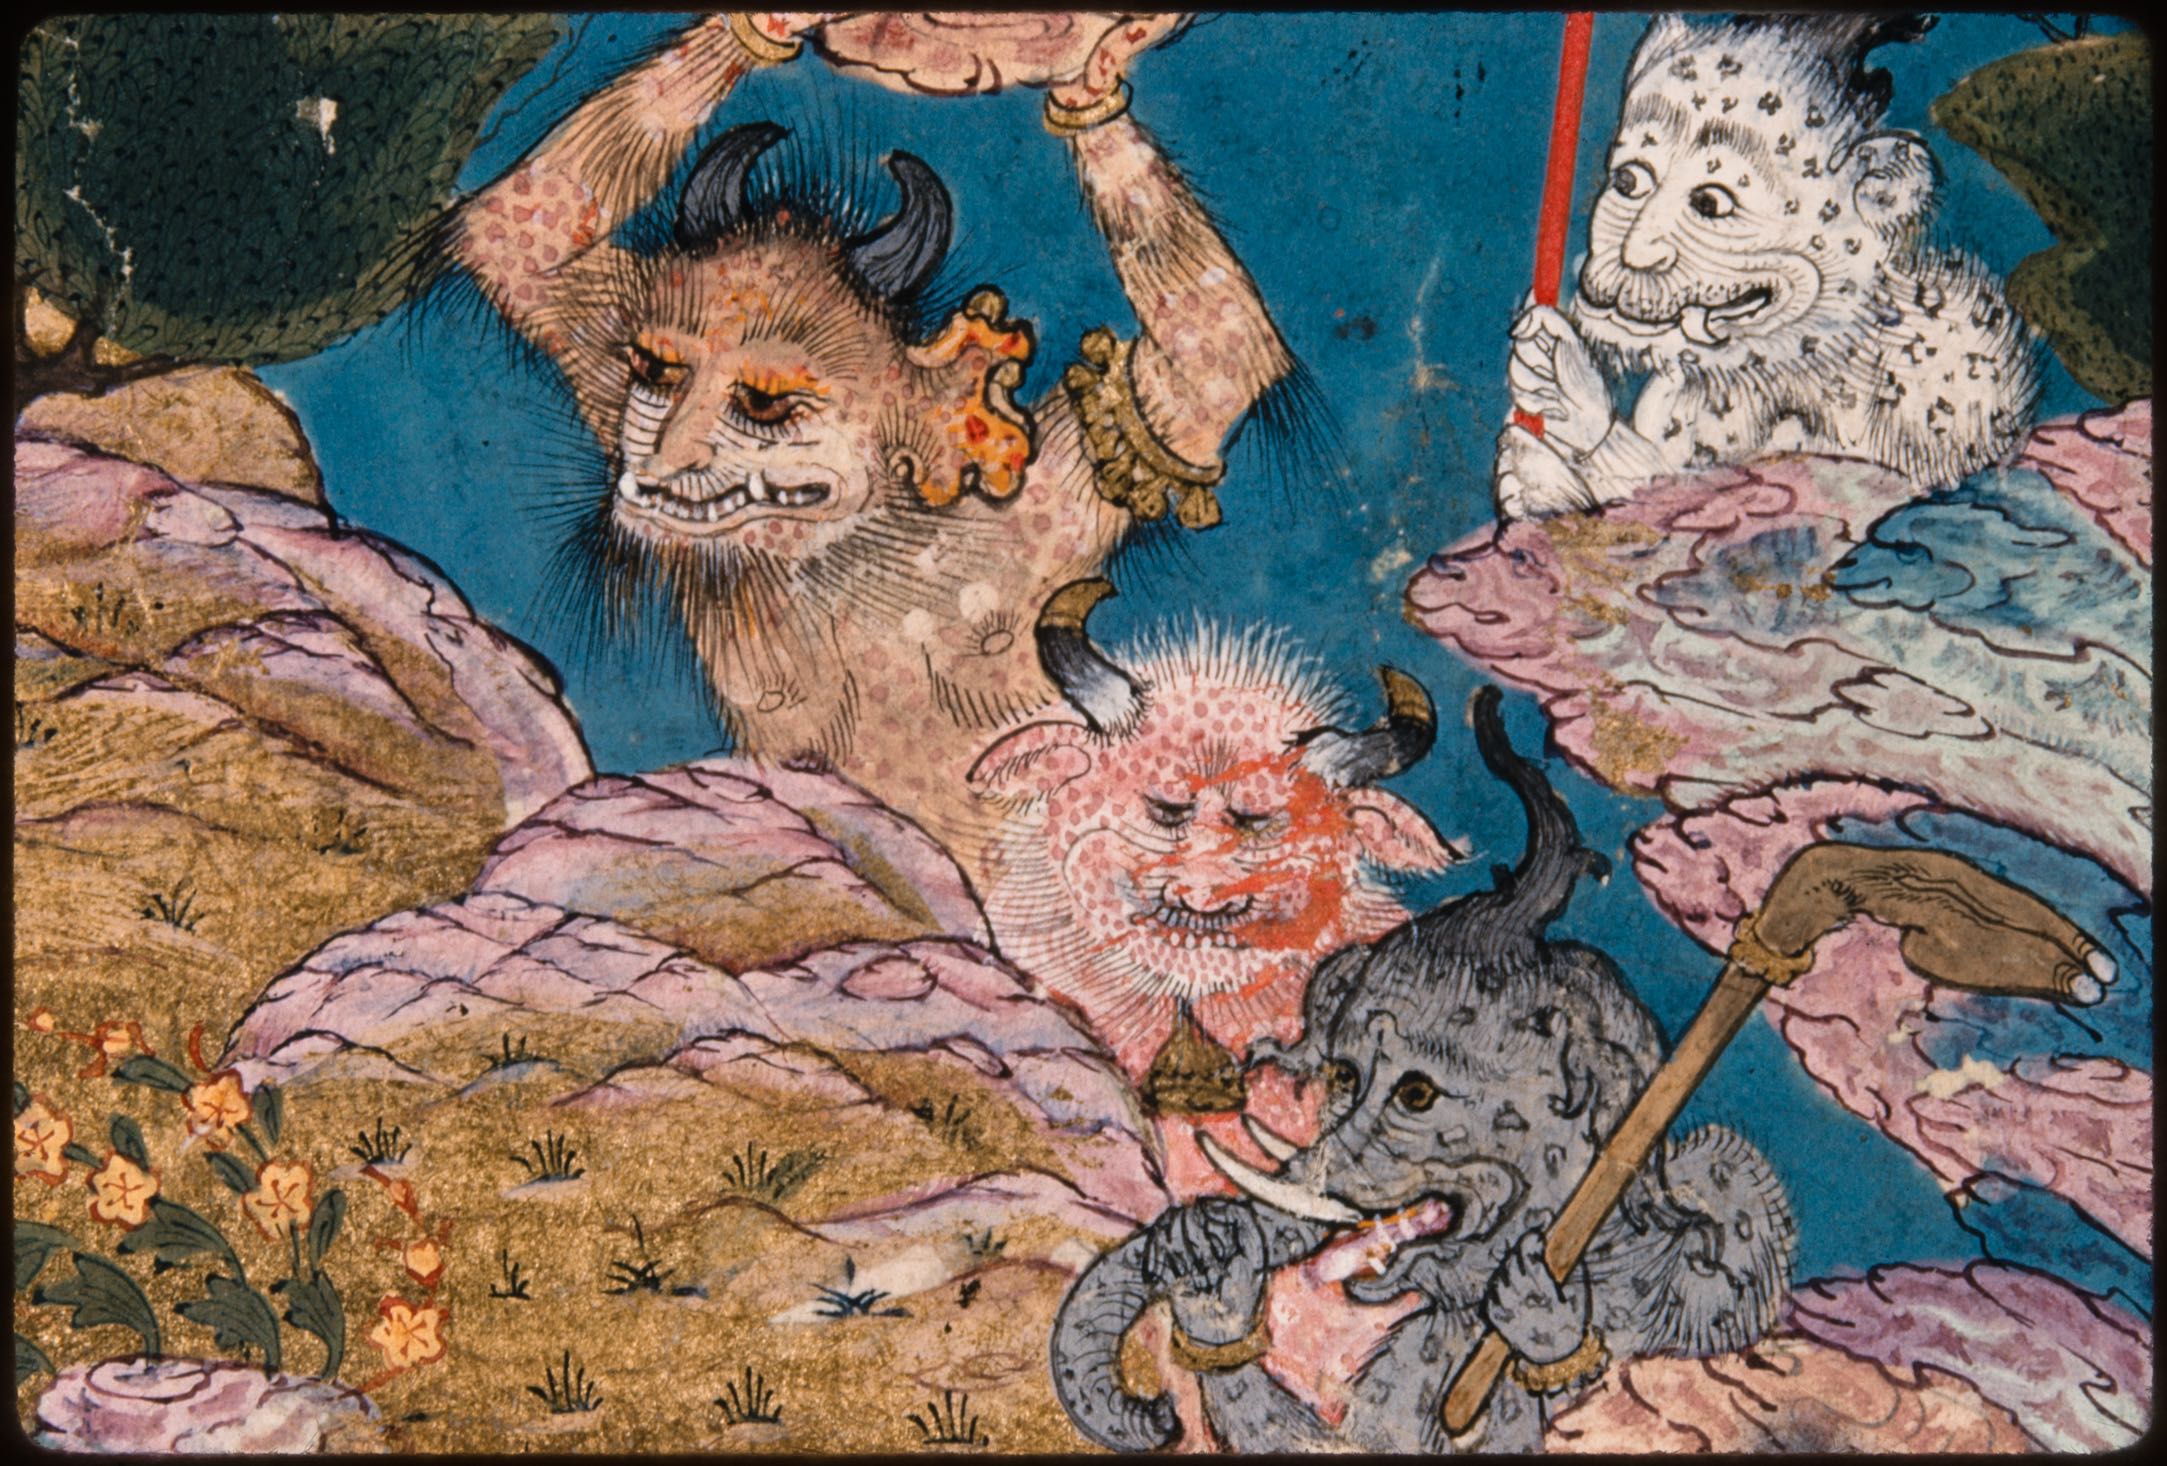 Detail of a demon from Rustam's Sixth Course: He Slays Arzhang (Tehran Museum of Contemporary Art), f. 122v from the Houghton Shahnama